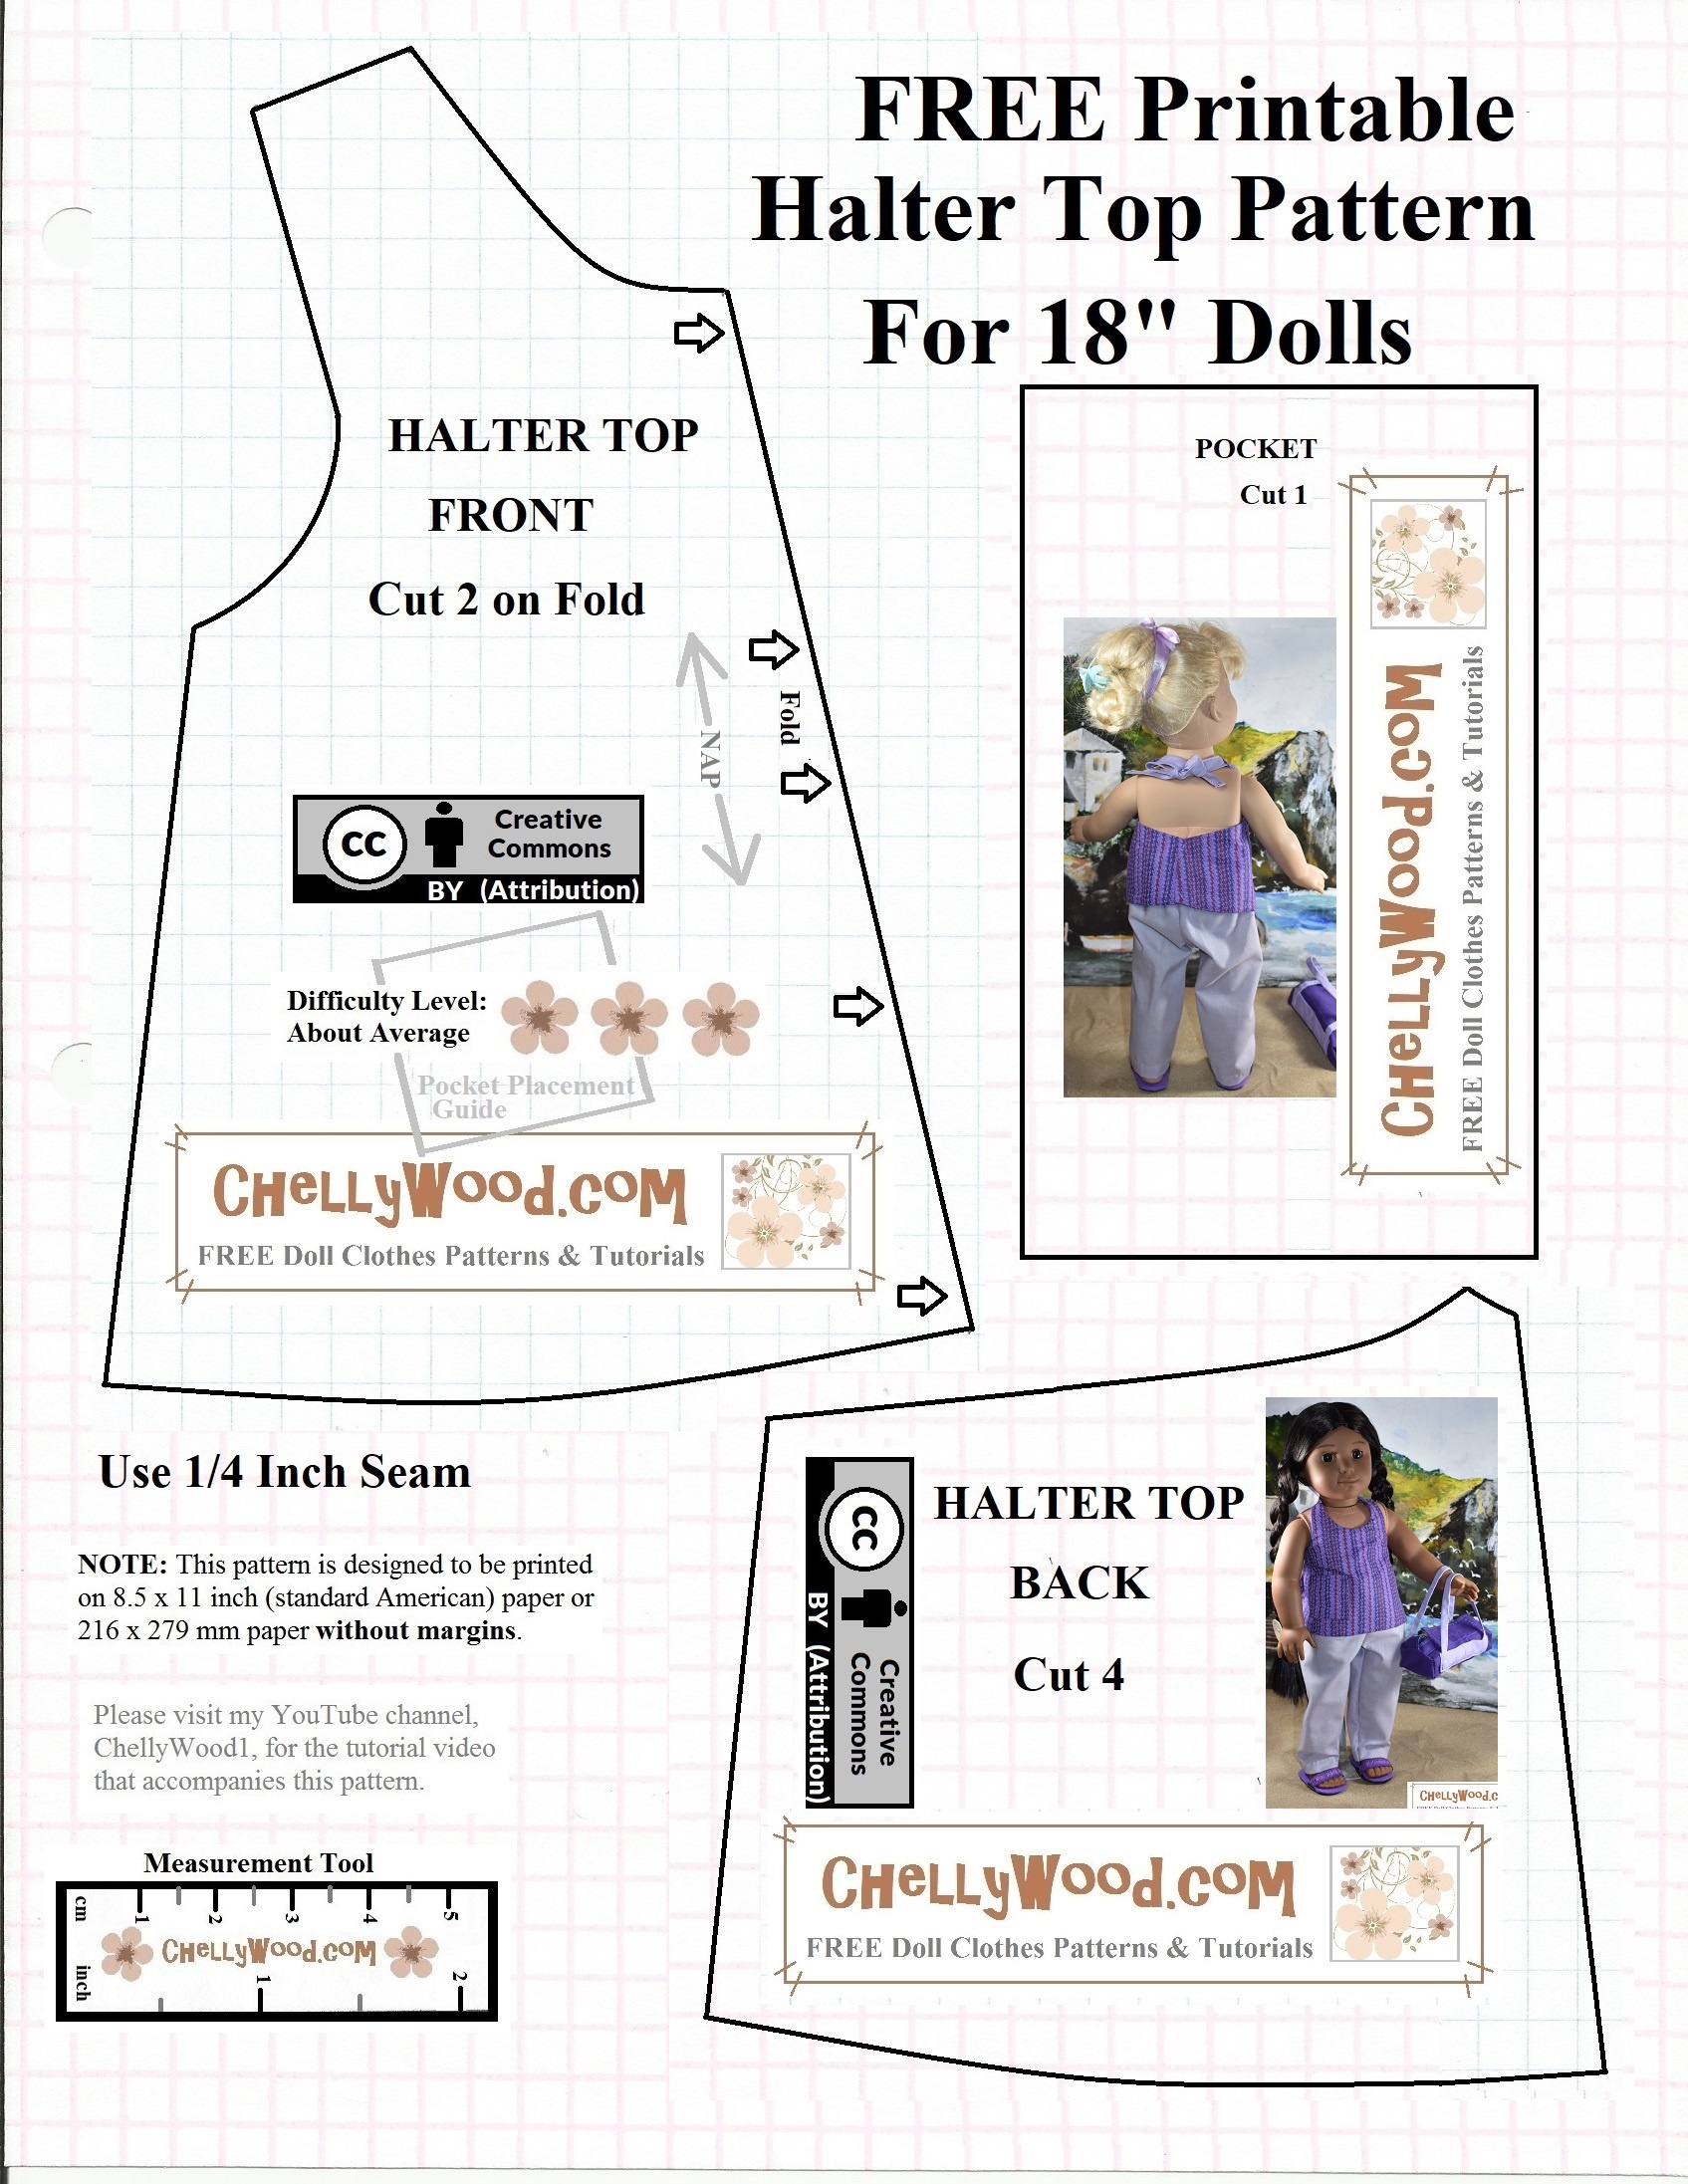 Free #agdoll Summer Shirt Pattern @ Chellywood #sewing 4#dolls - Free Printable Doll Clothes Patterns For 18 Inch Dolls